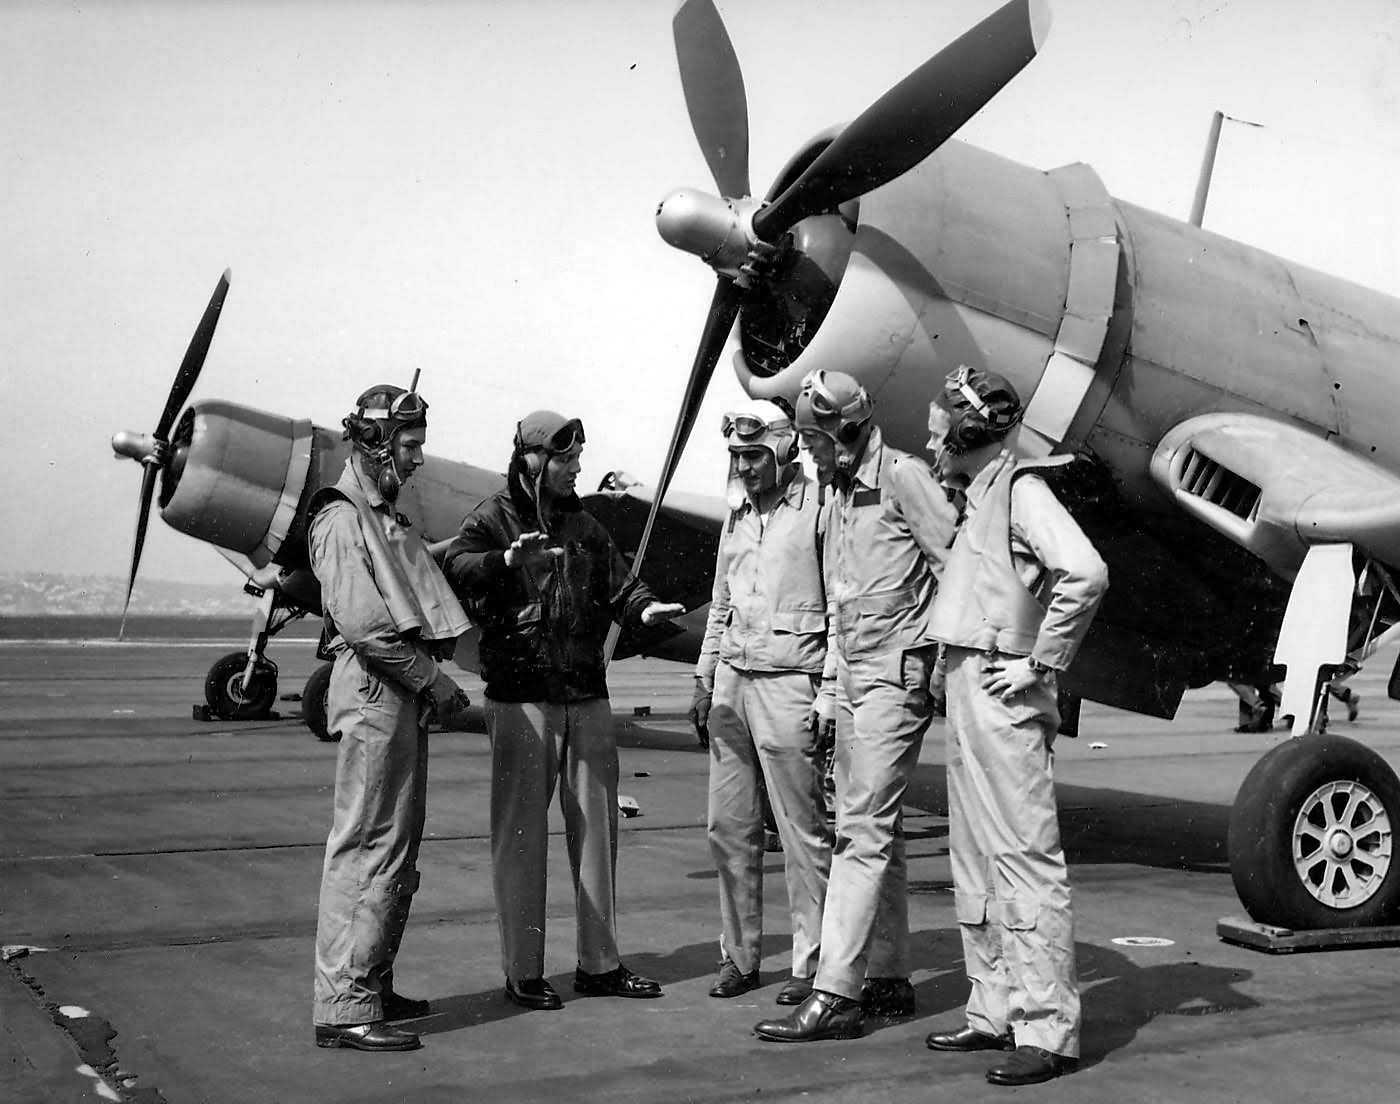 LtCdr_Joseph_Clifton_and_pilots_of_VF-12_stand_in_front_of_F4U-1_Corsair_1943.jpg